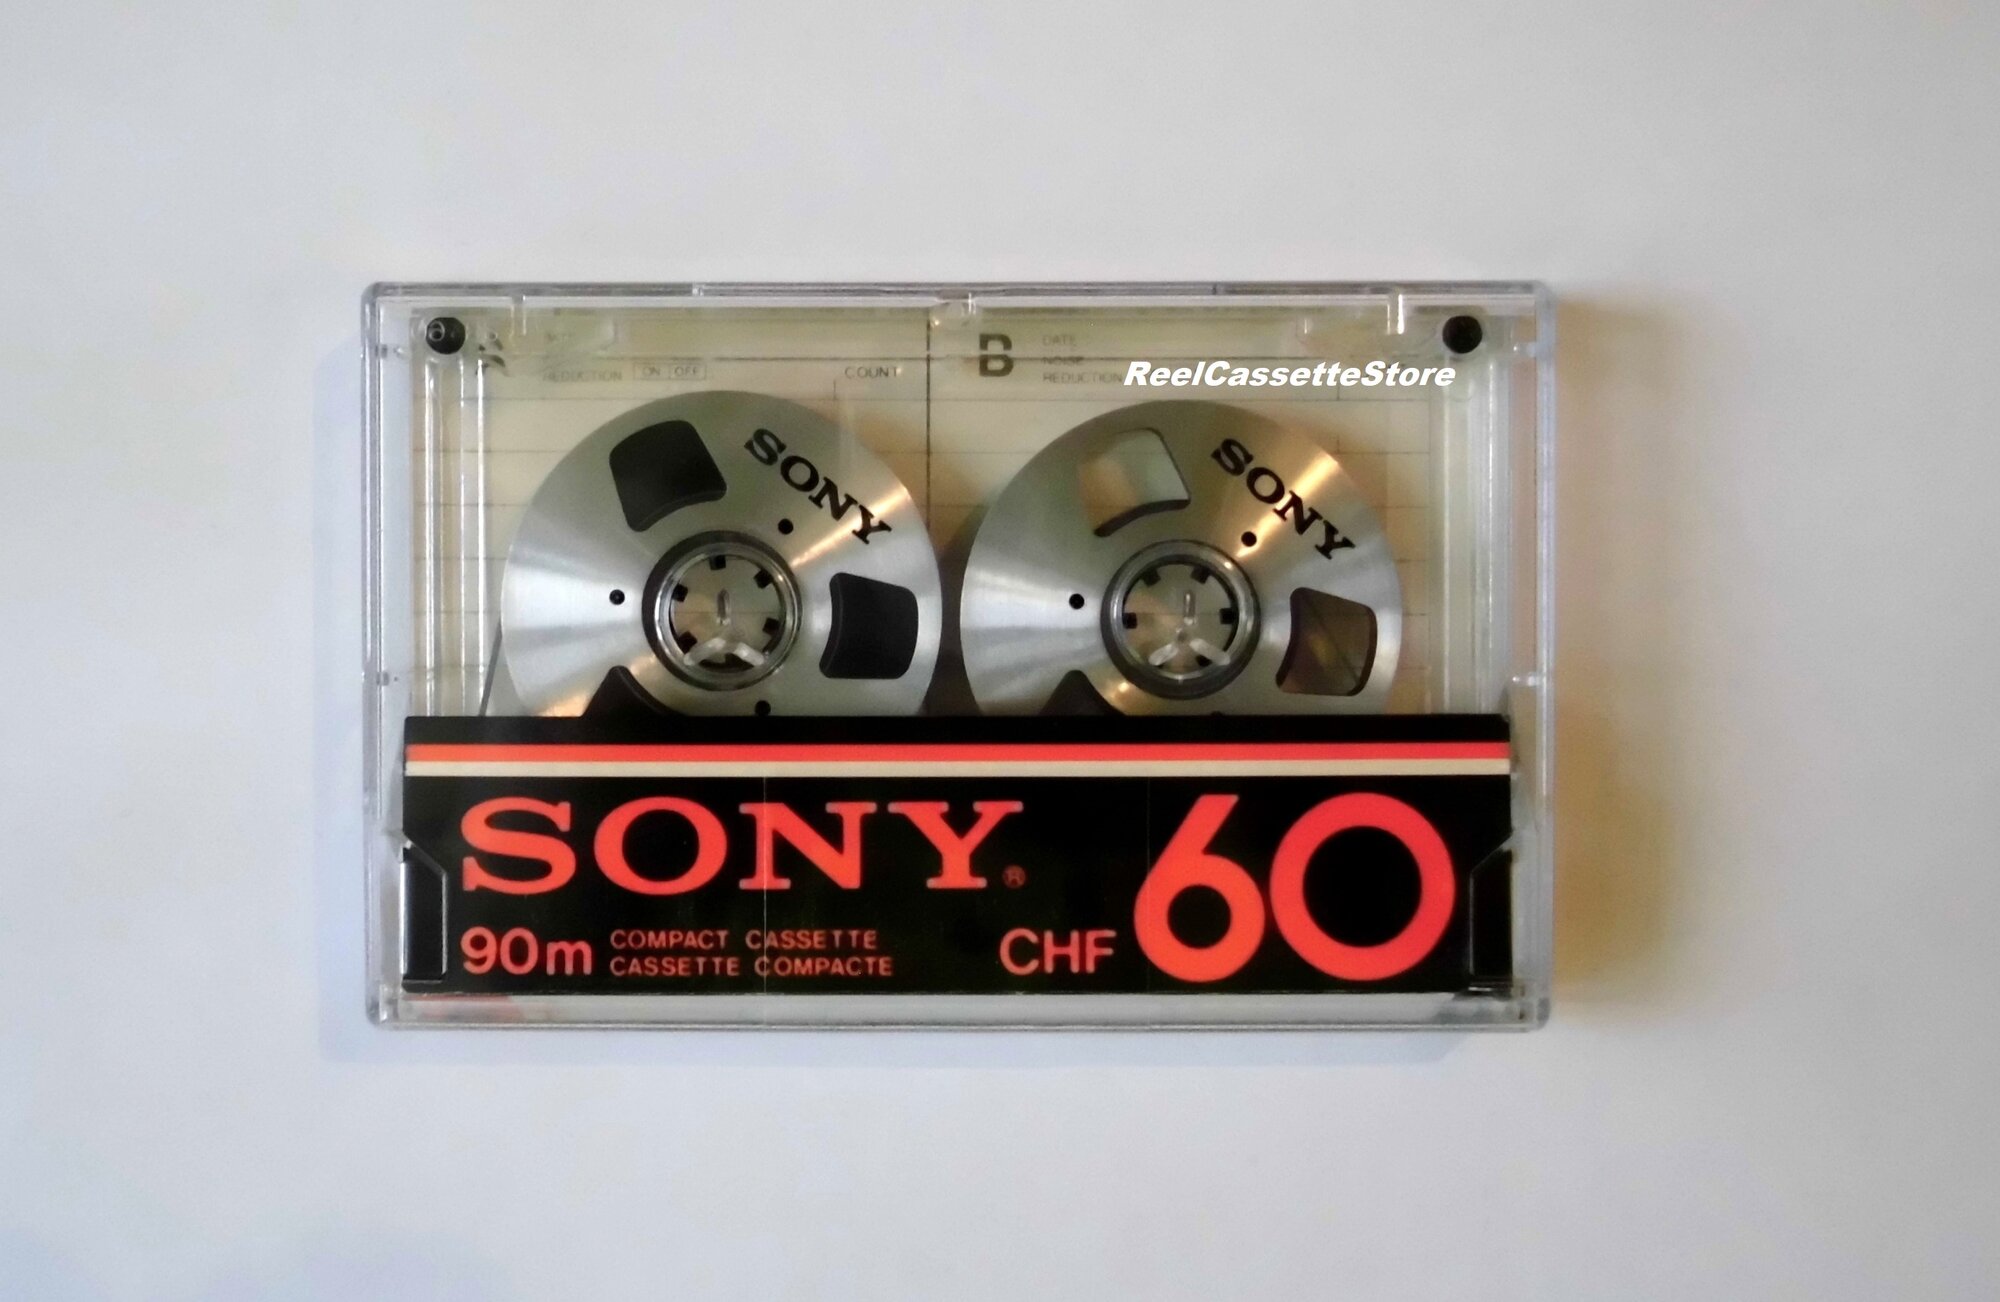 The only manufacturer of HQ Reel-to-Reel Cassette Tapes